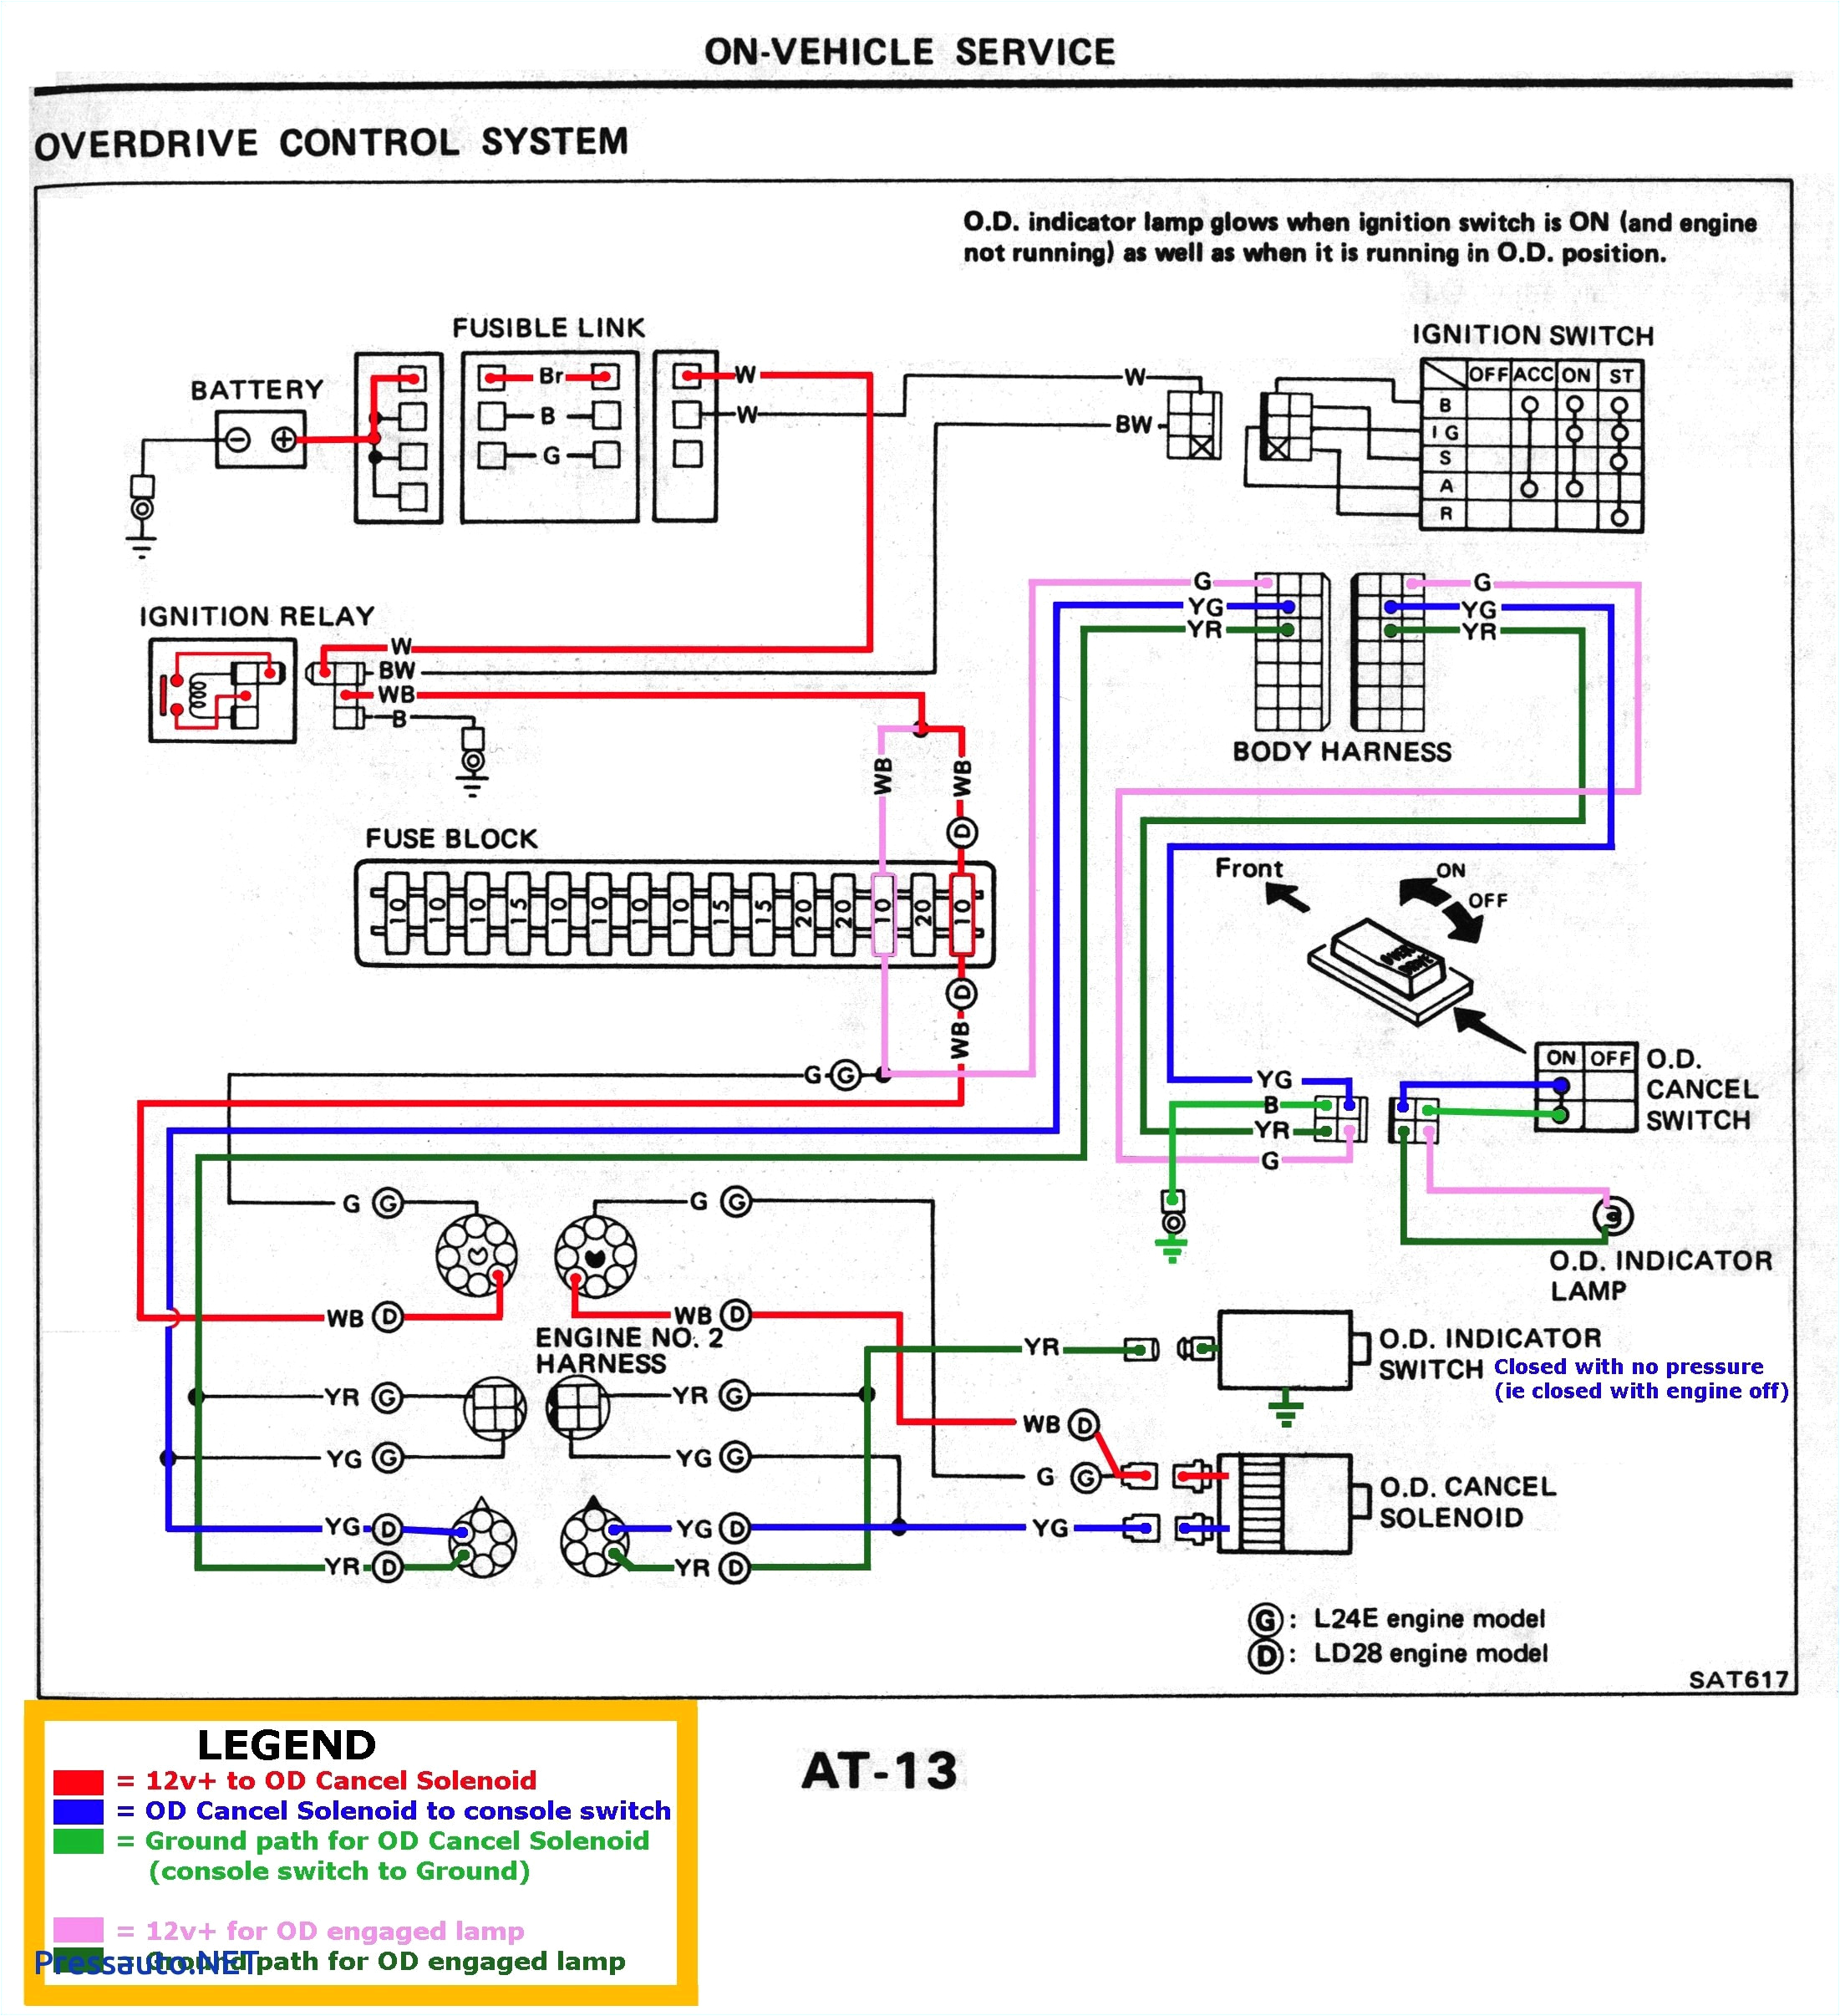 photo wiring diagram for electric scooter case 831 tractor wiring diagram wiring diagramscout ii rear wire diagram online wiring diagramscout ii rear jpg